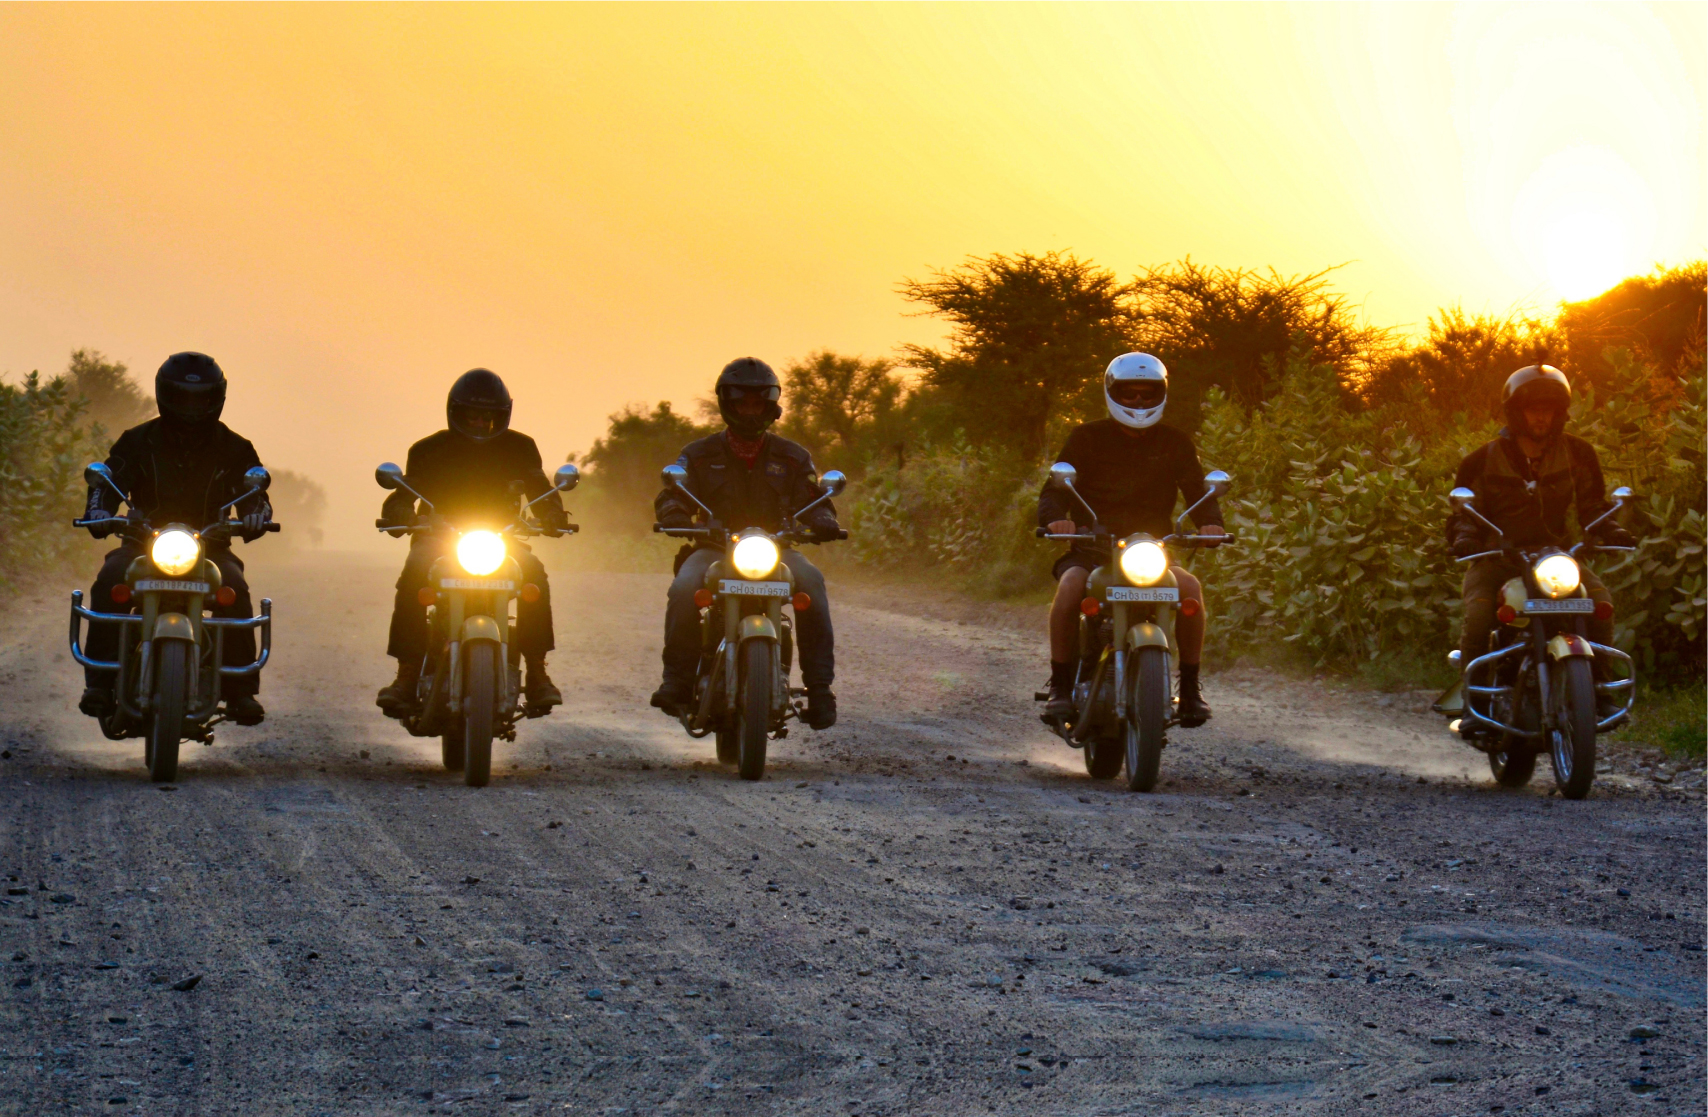 global motorcycle tours